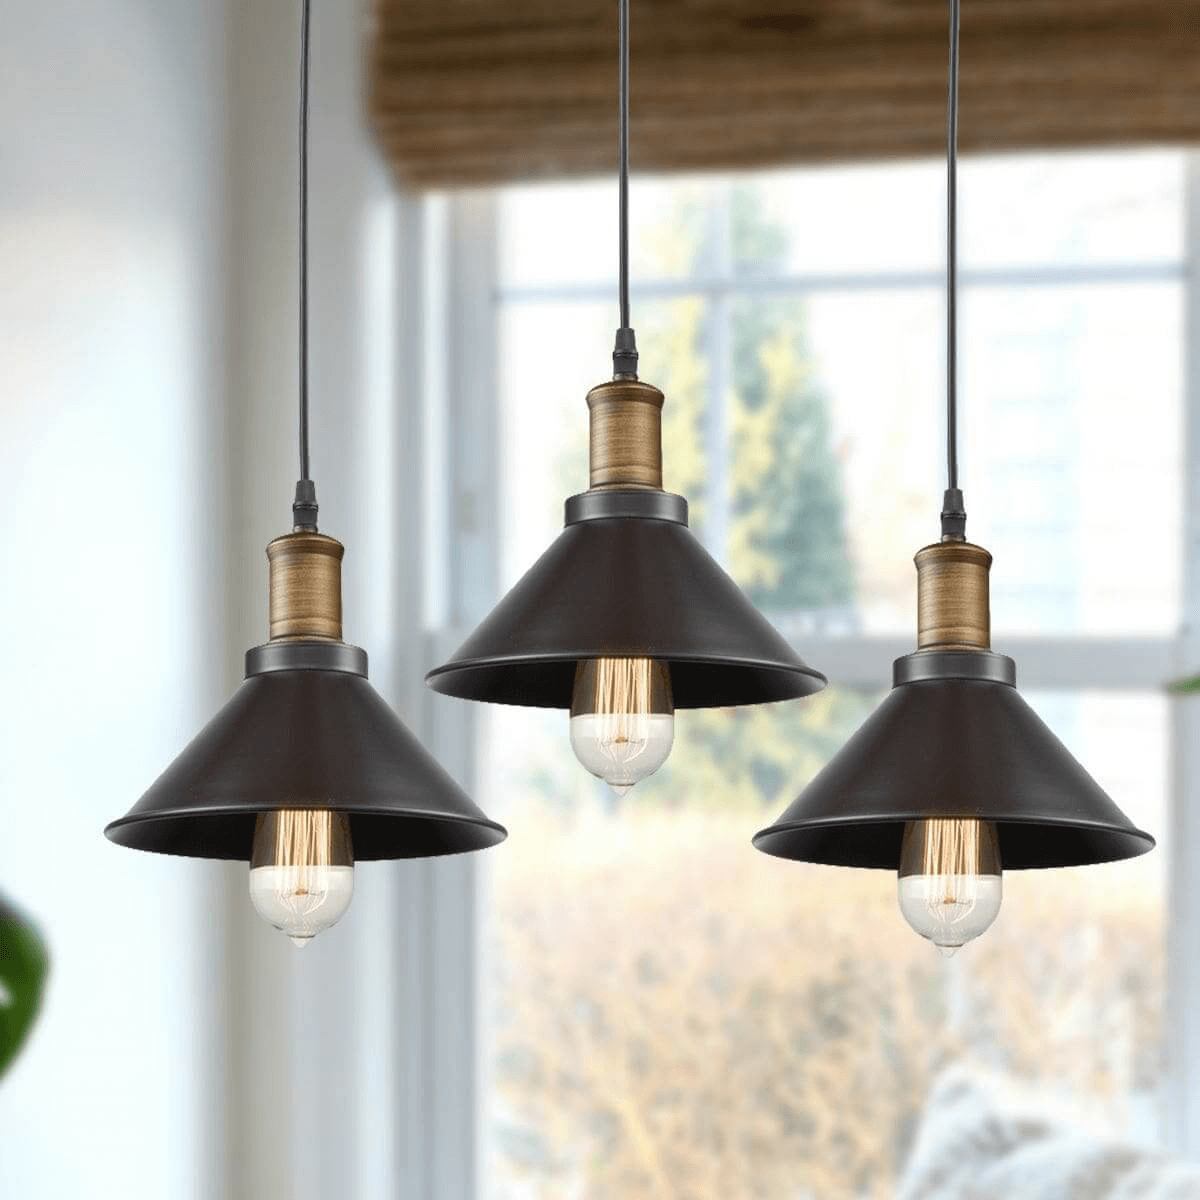 14 Kitchen Island Pendant Lighting Ideas for Your Home